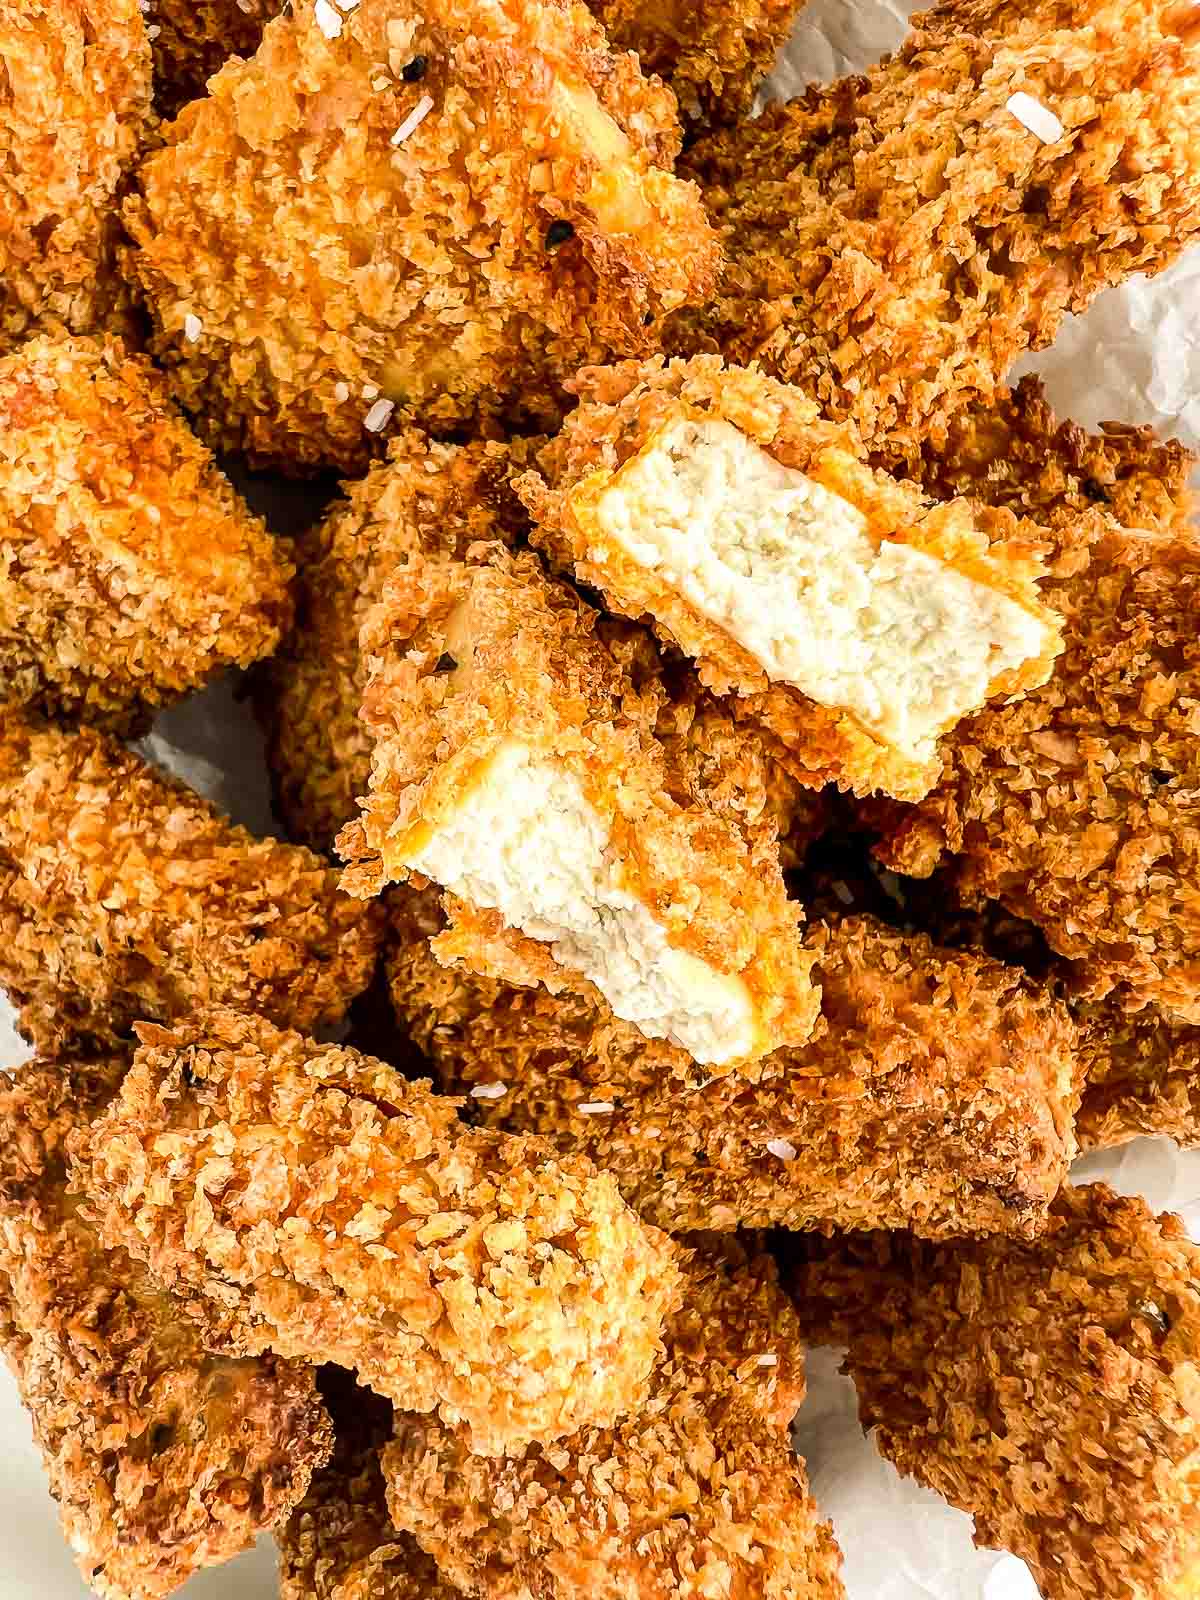 Close-up image of tofu nuggets with one nugget ripped in half.